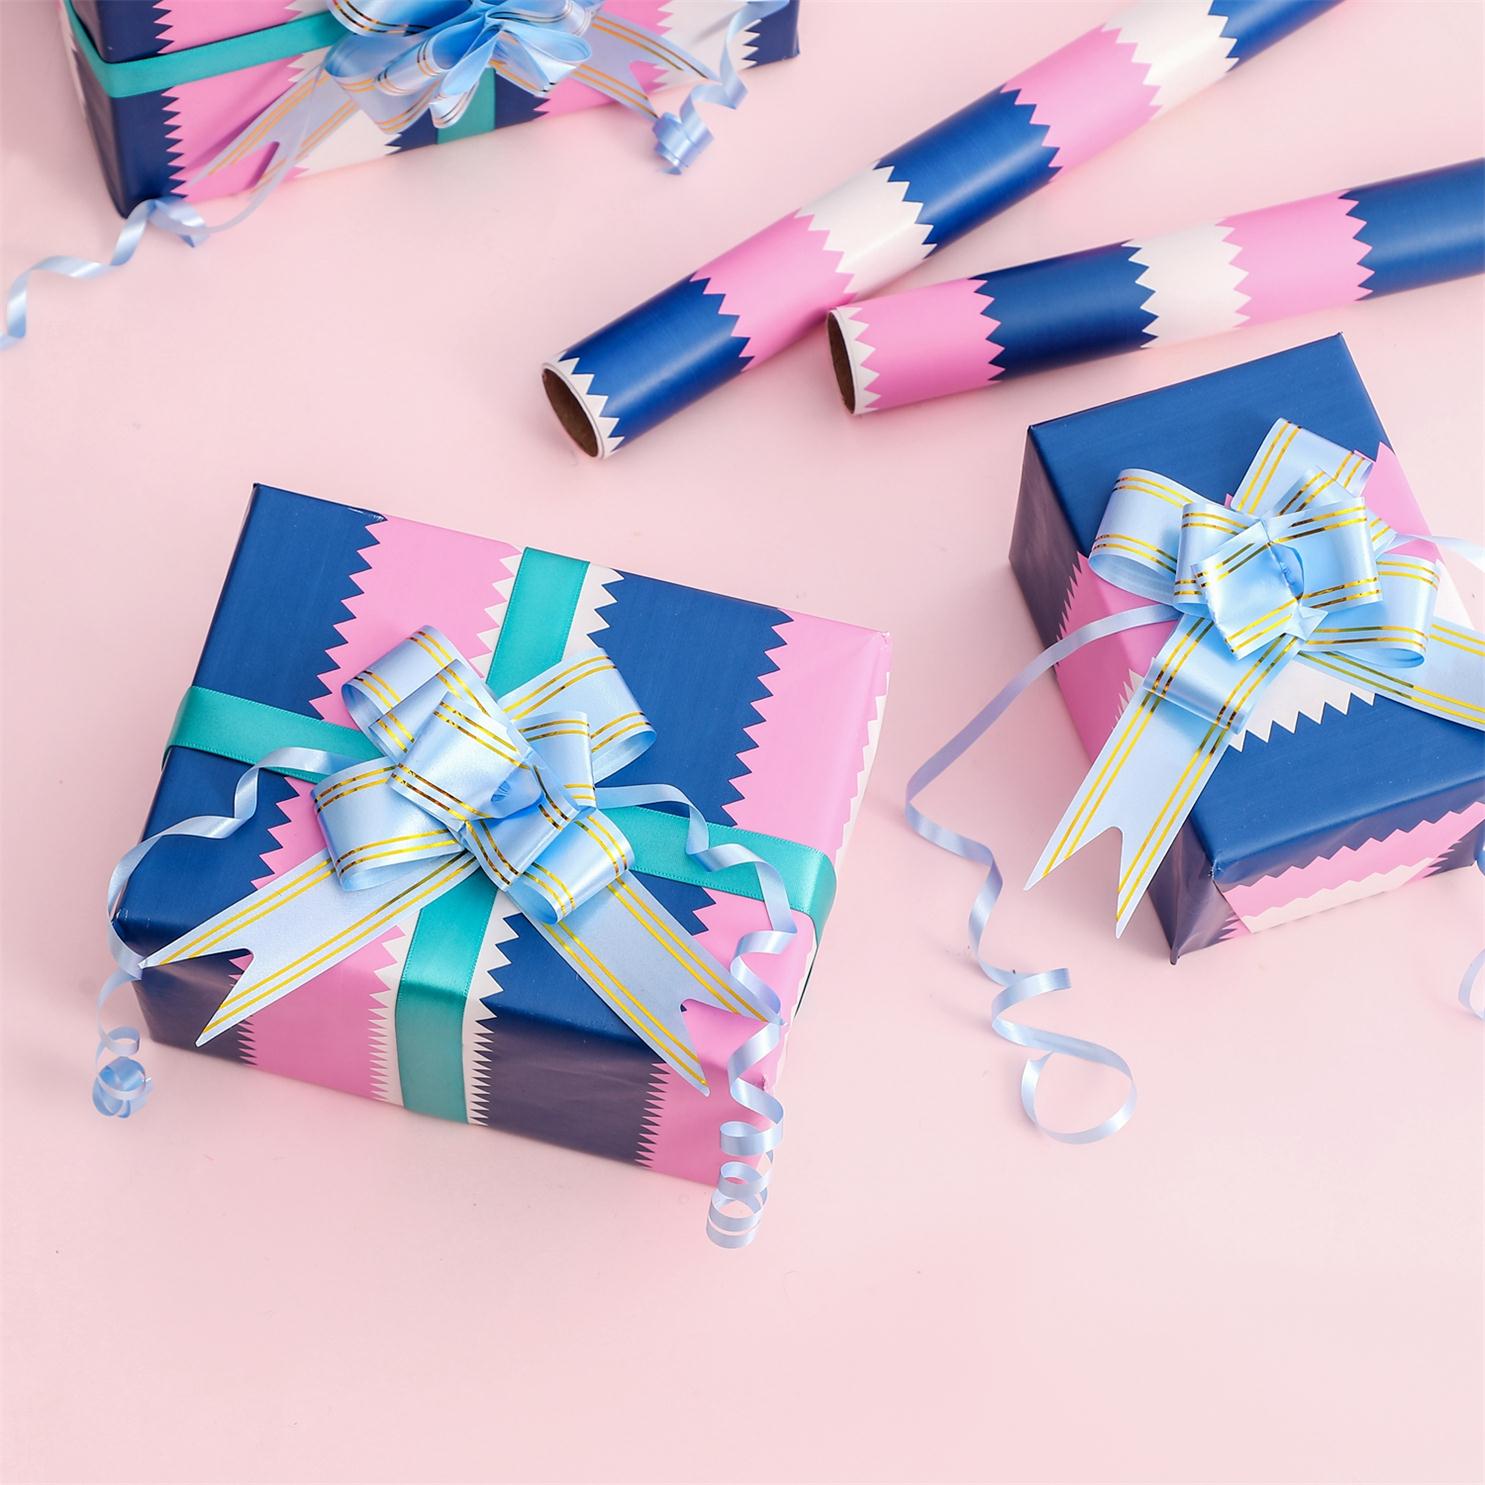 Jialan Package gift wrapping paper wholesale suppliers for holiday gifts-1